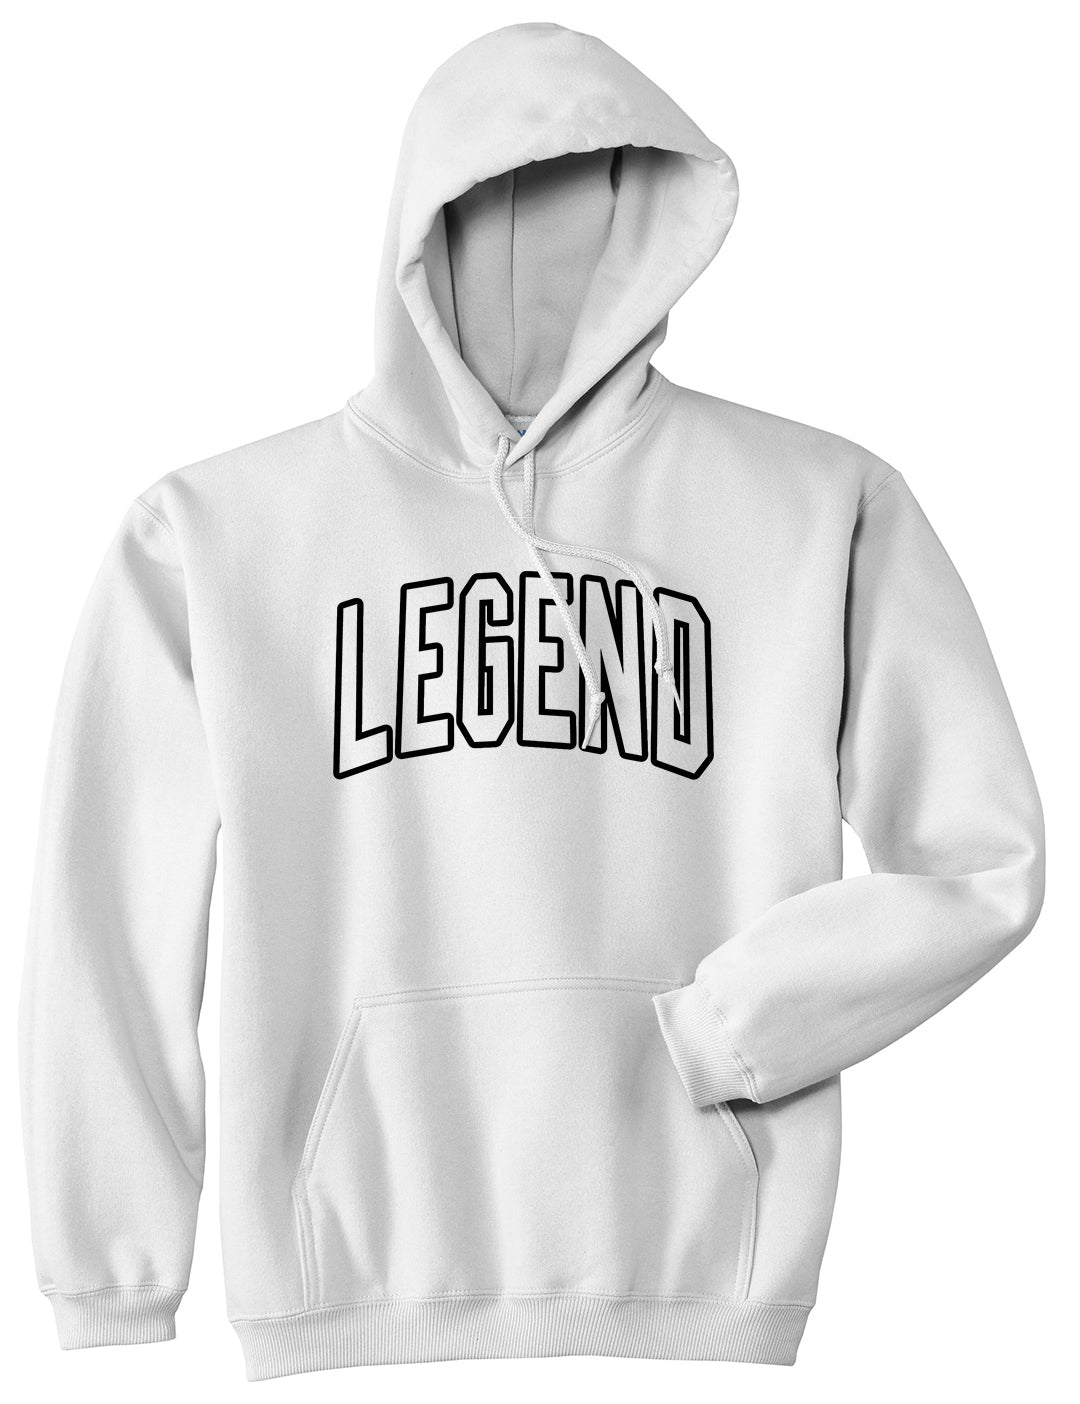 Legend Outline Mens Pullover Hoodie White by Kings Of NY